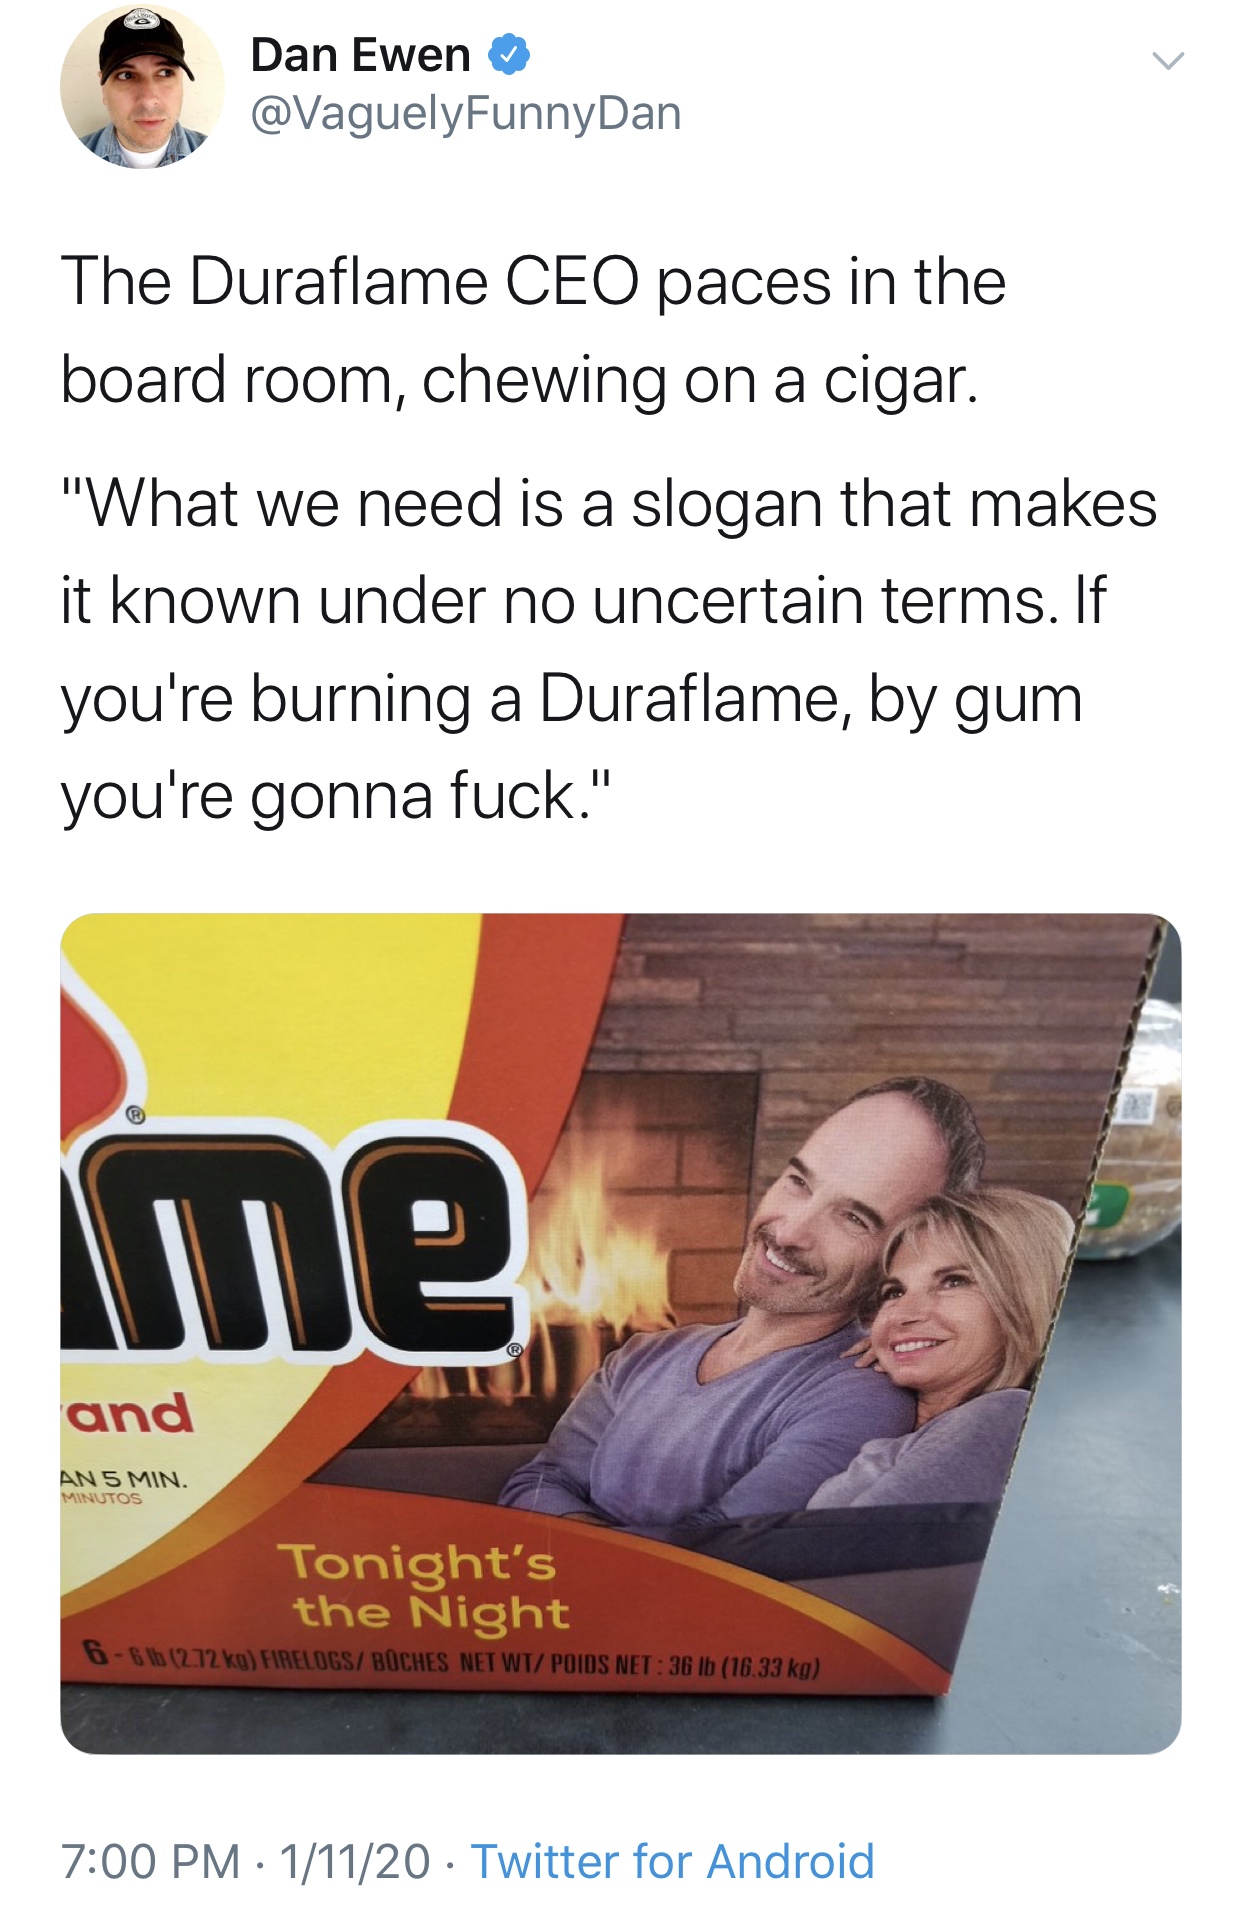 poster - Dan Ewen The Duraflame Ceo paces in the board room, chewing on a cigar. "What we need is a slogan that makes it known under no uncertain terms. If you're burning a Duraflame, by gum you're gonna fuck." me. and Tonight's the Night 11120. Twitter f